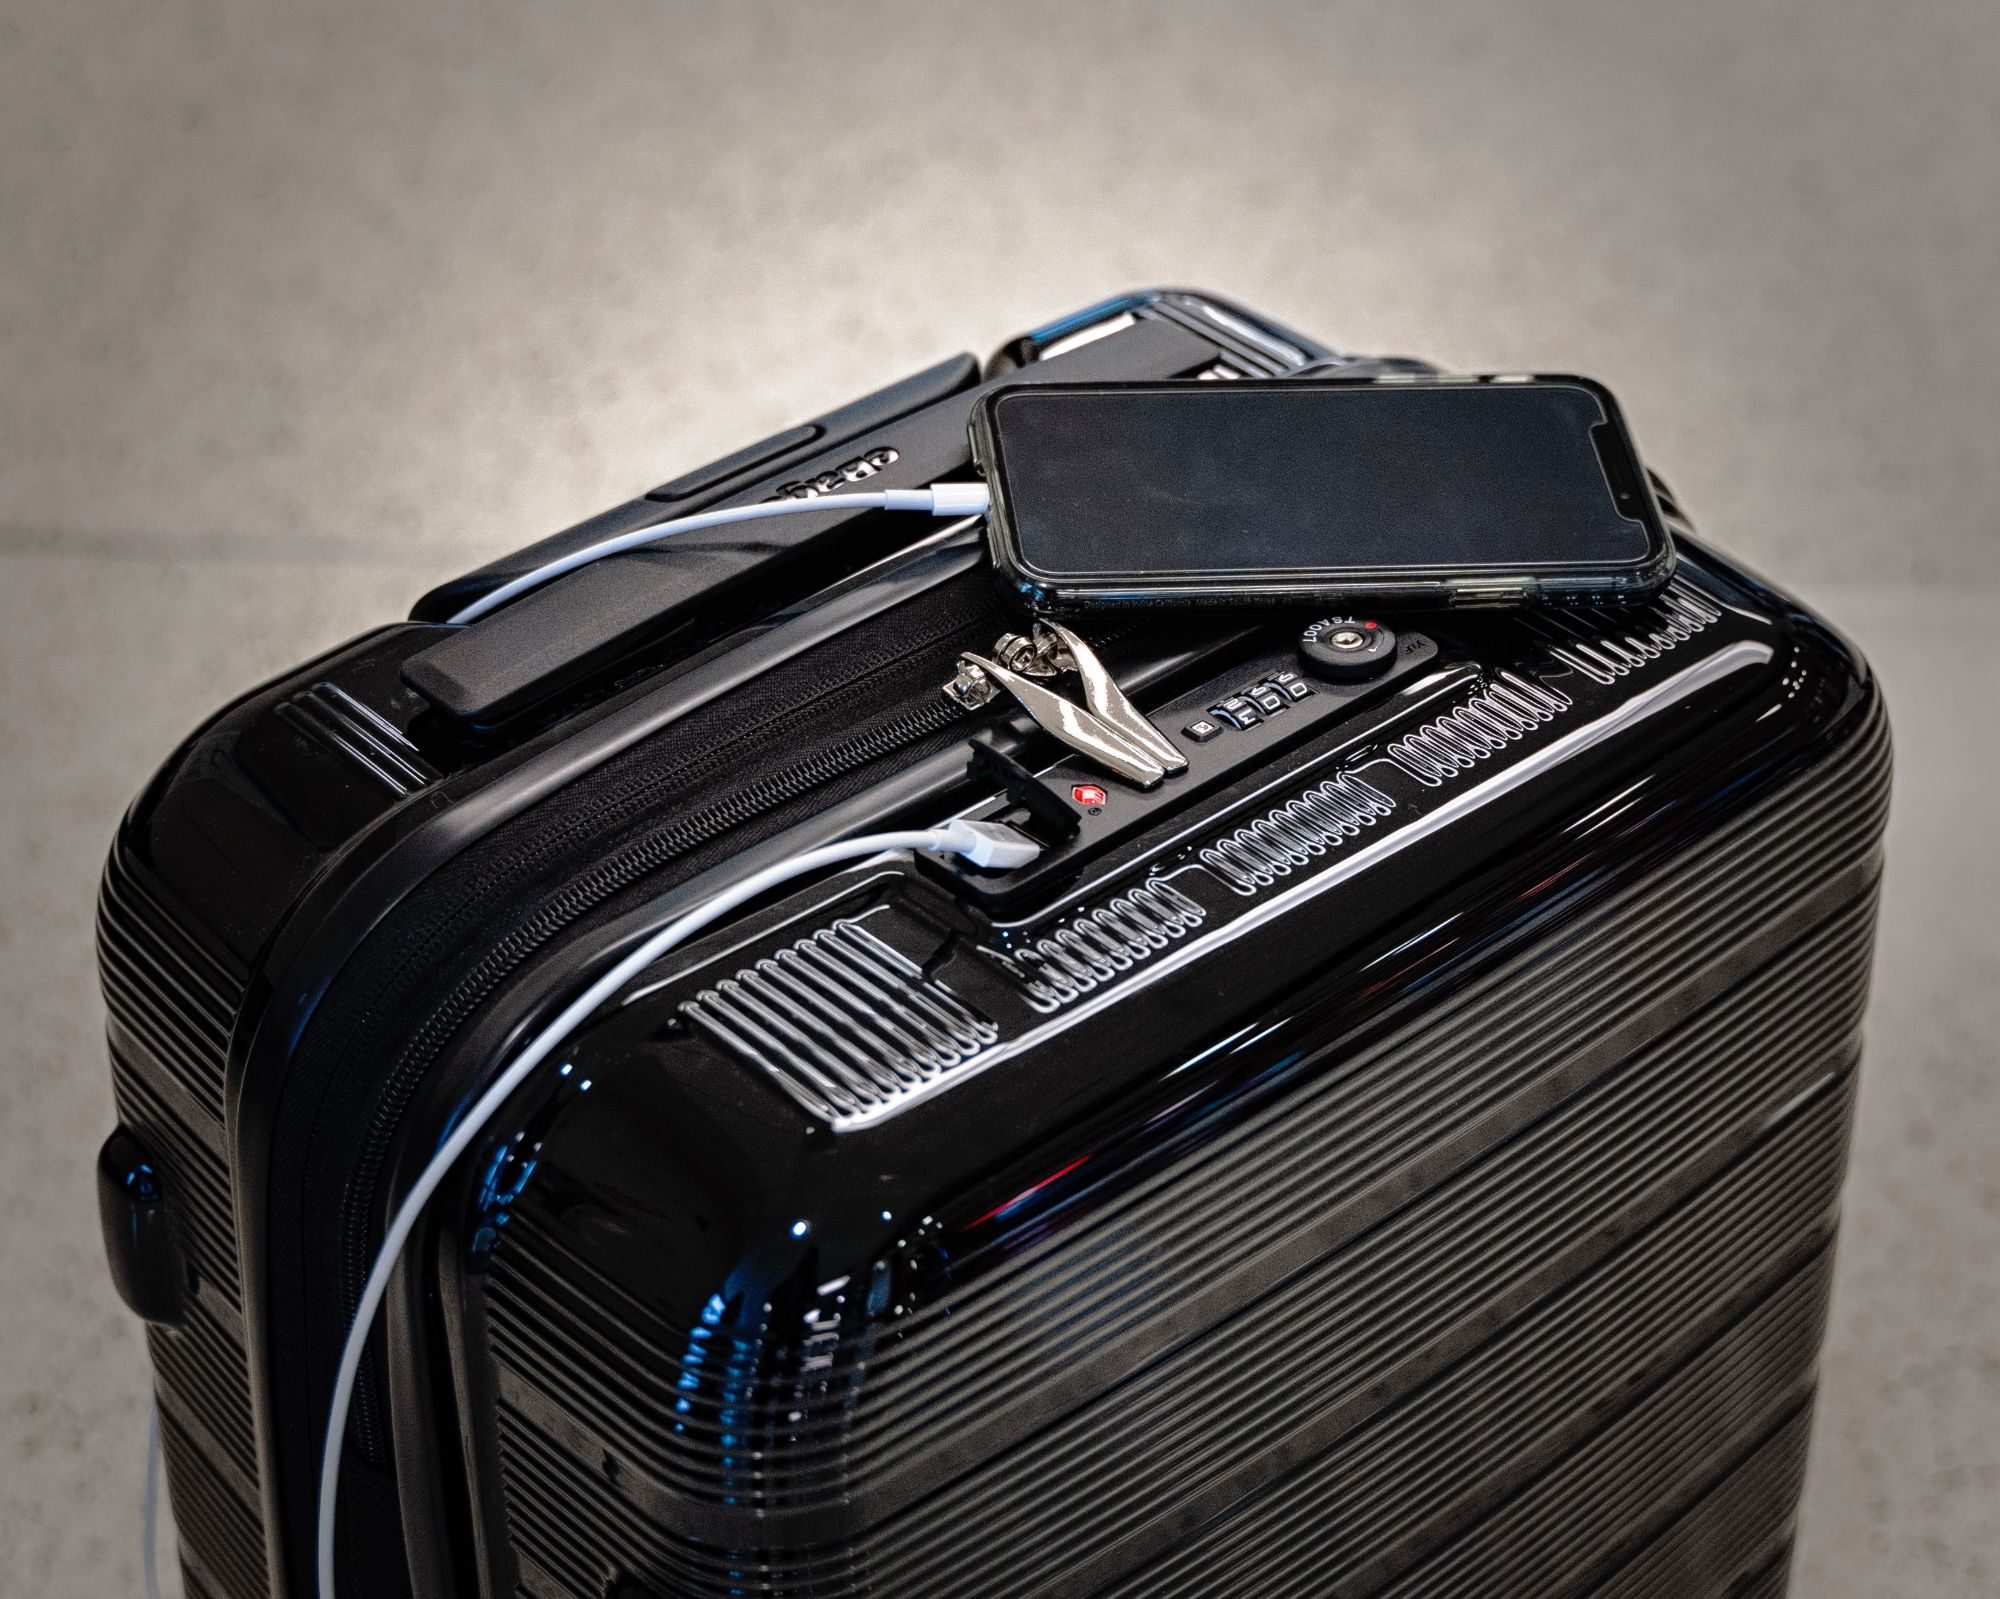 lone suitcase from course helping you identify suspect bags, bomb threats, suspicious items.